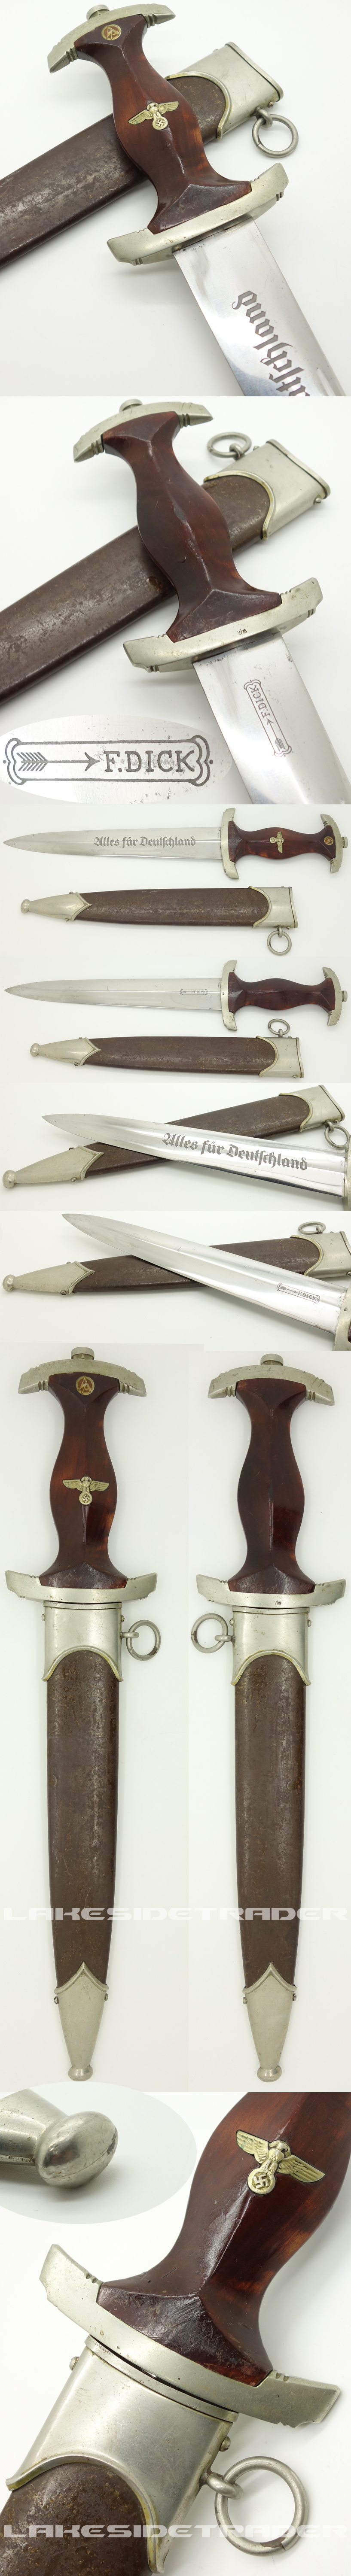 Early SA Dagger by F. Dick